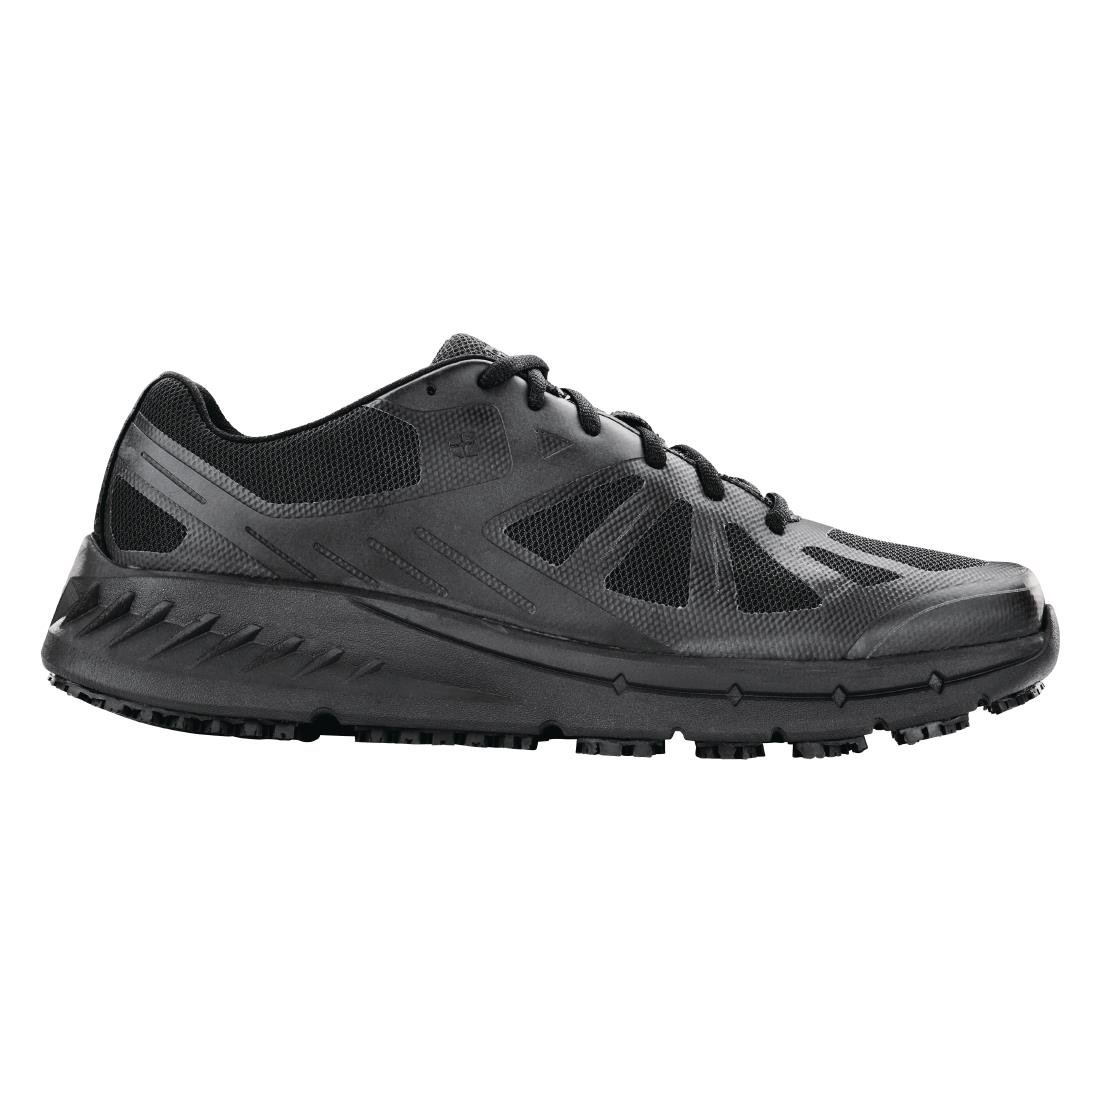 BB599-46 Shoes for Crews Endurance Trainers Black Size 46